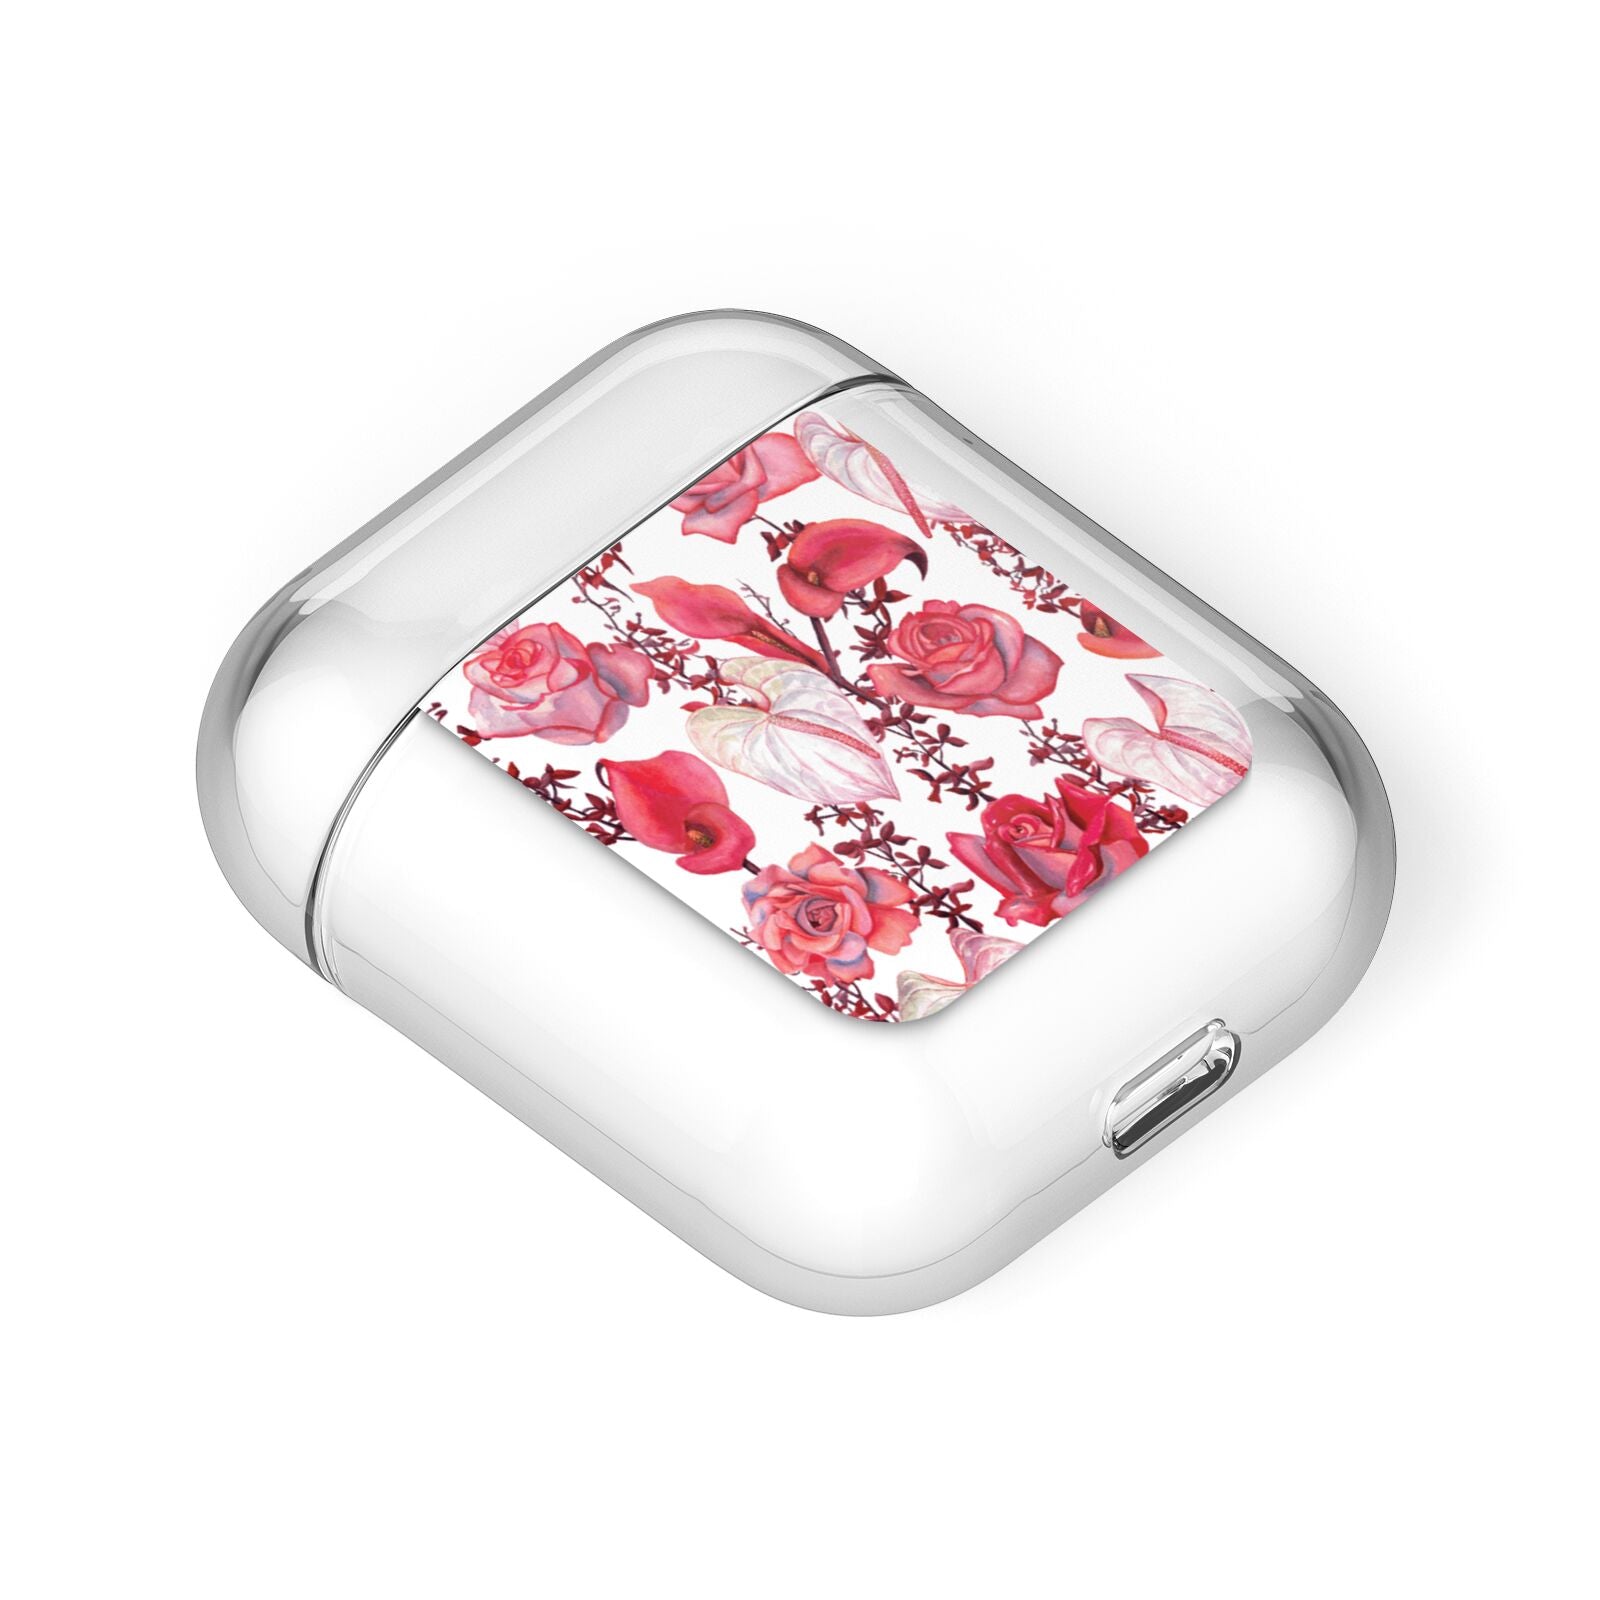 Valentines Flowers AirPods Case Laid Flat